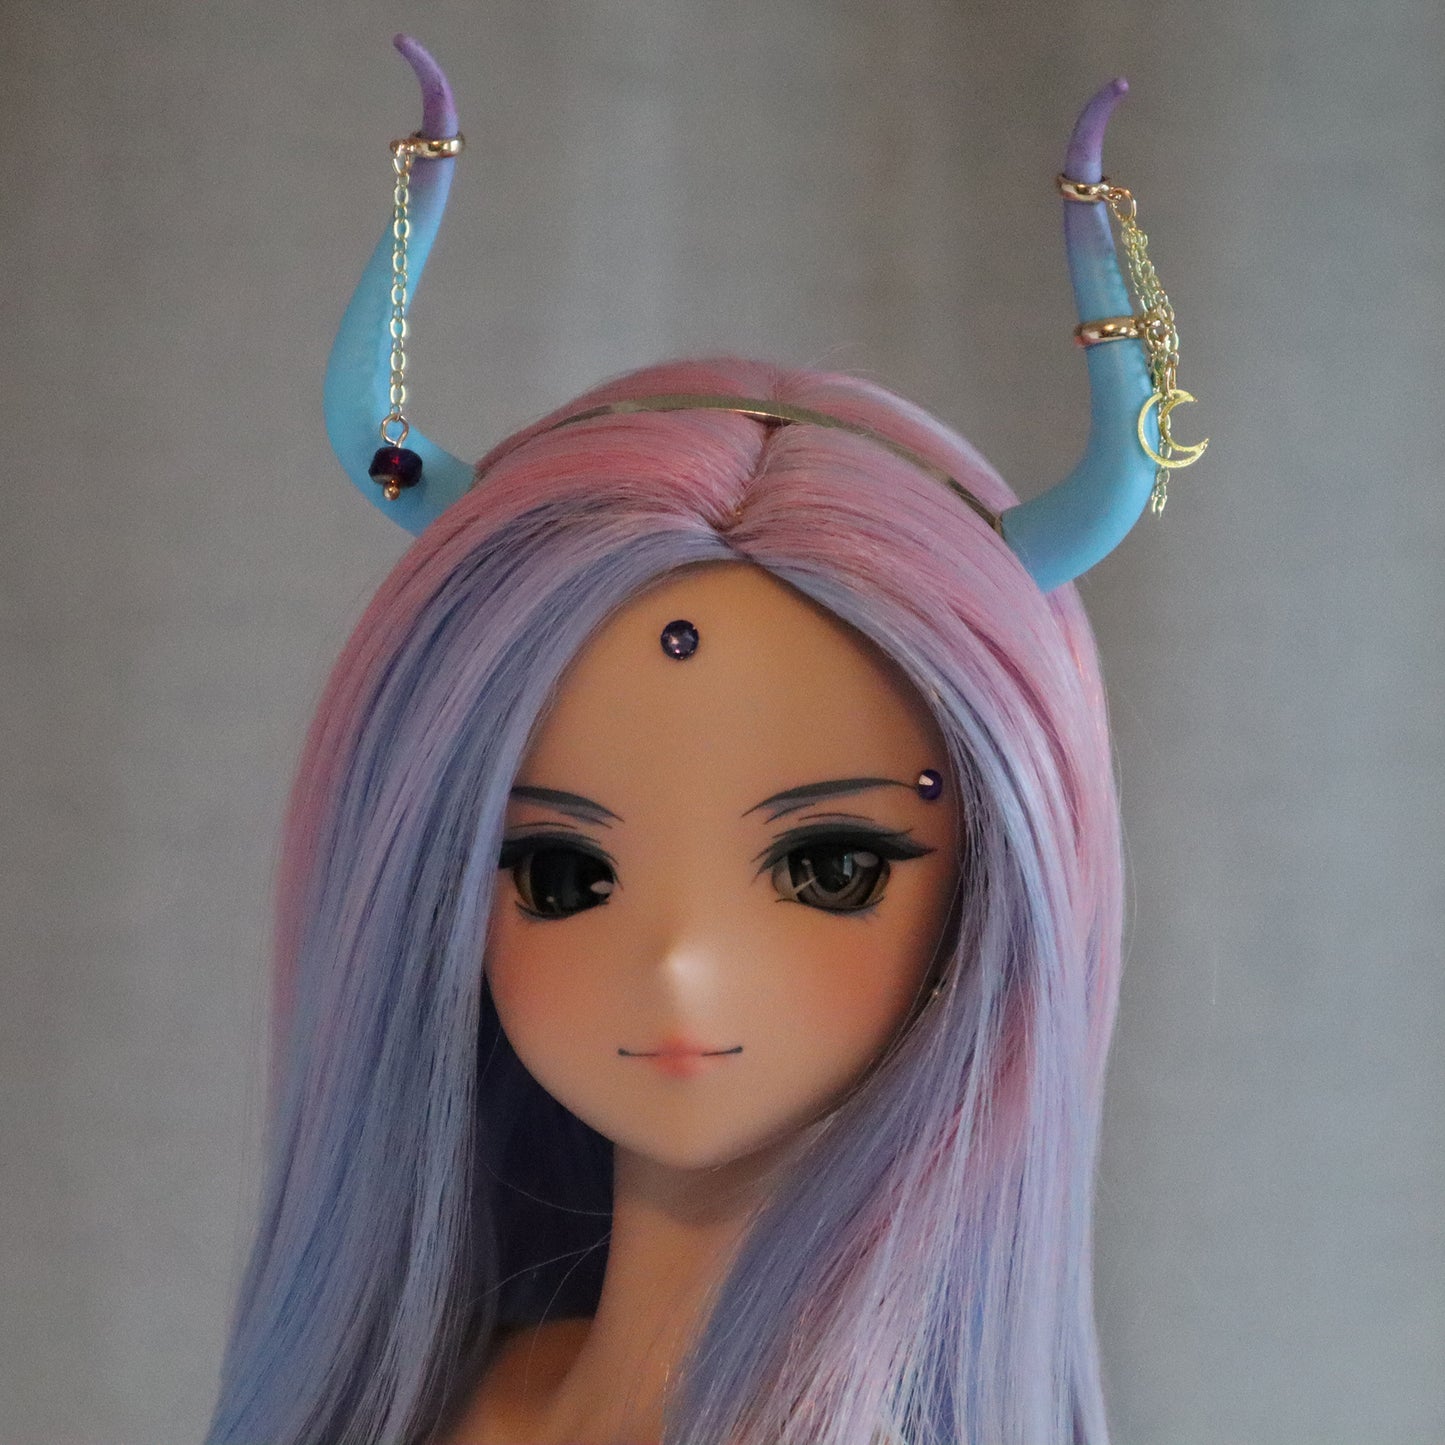 Magnetic Cosplay / Costume Horns - Fantasy Bejeweled